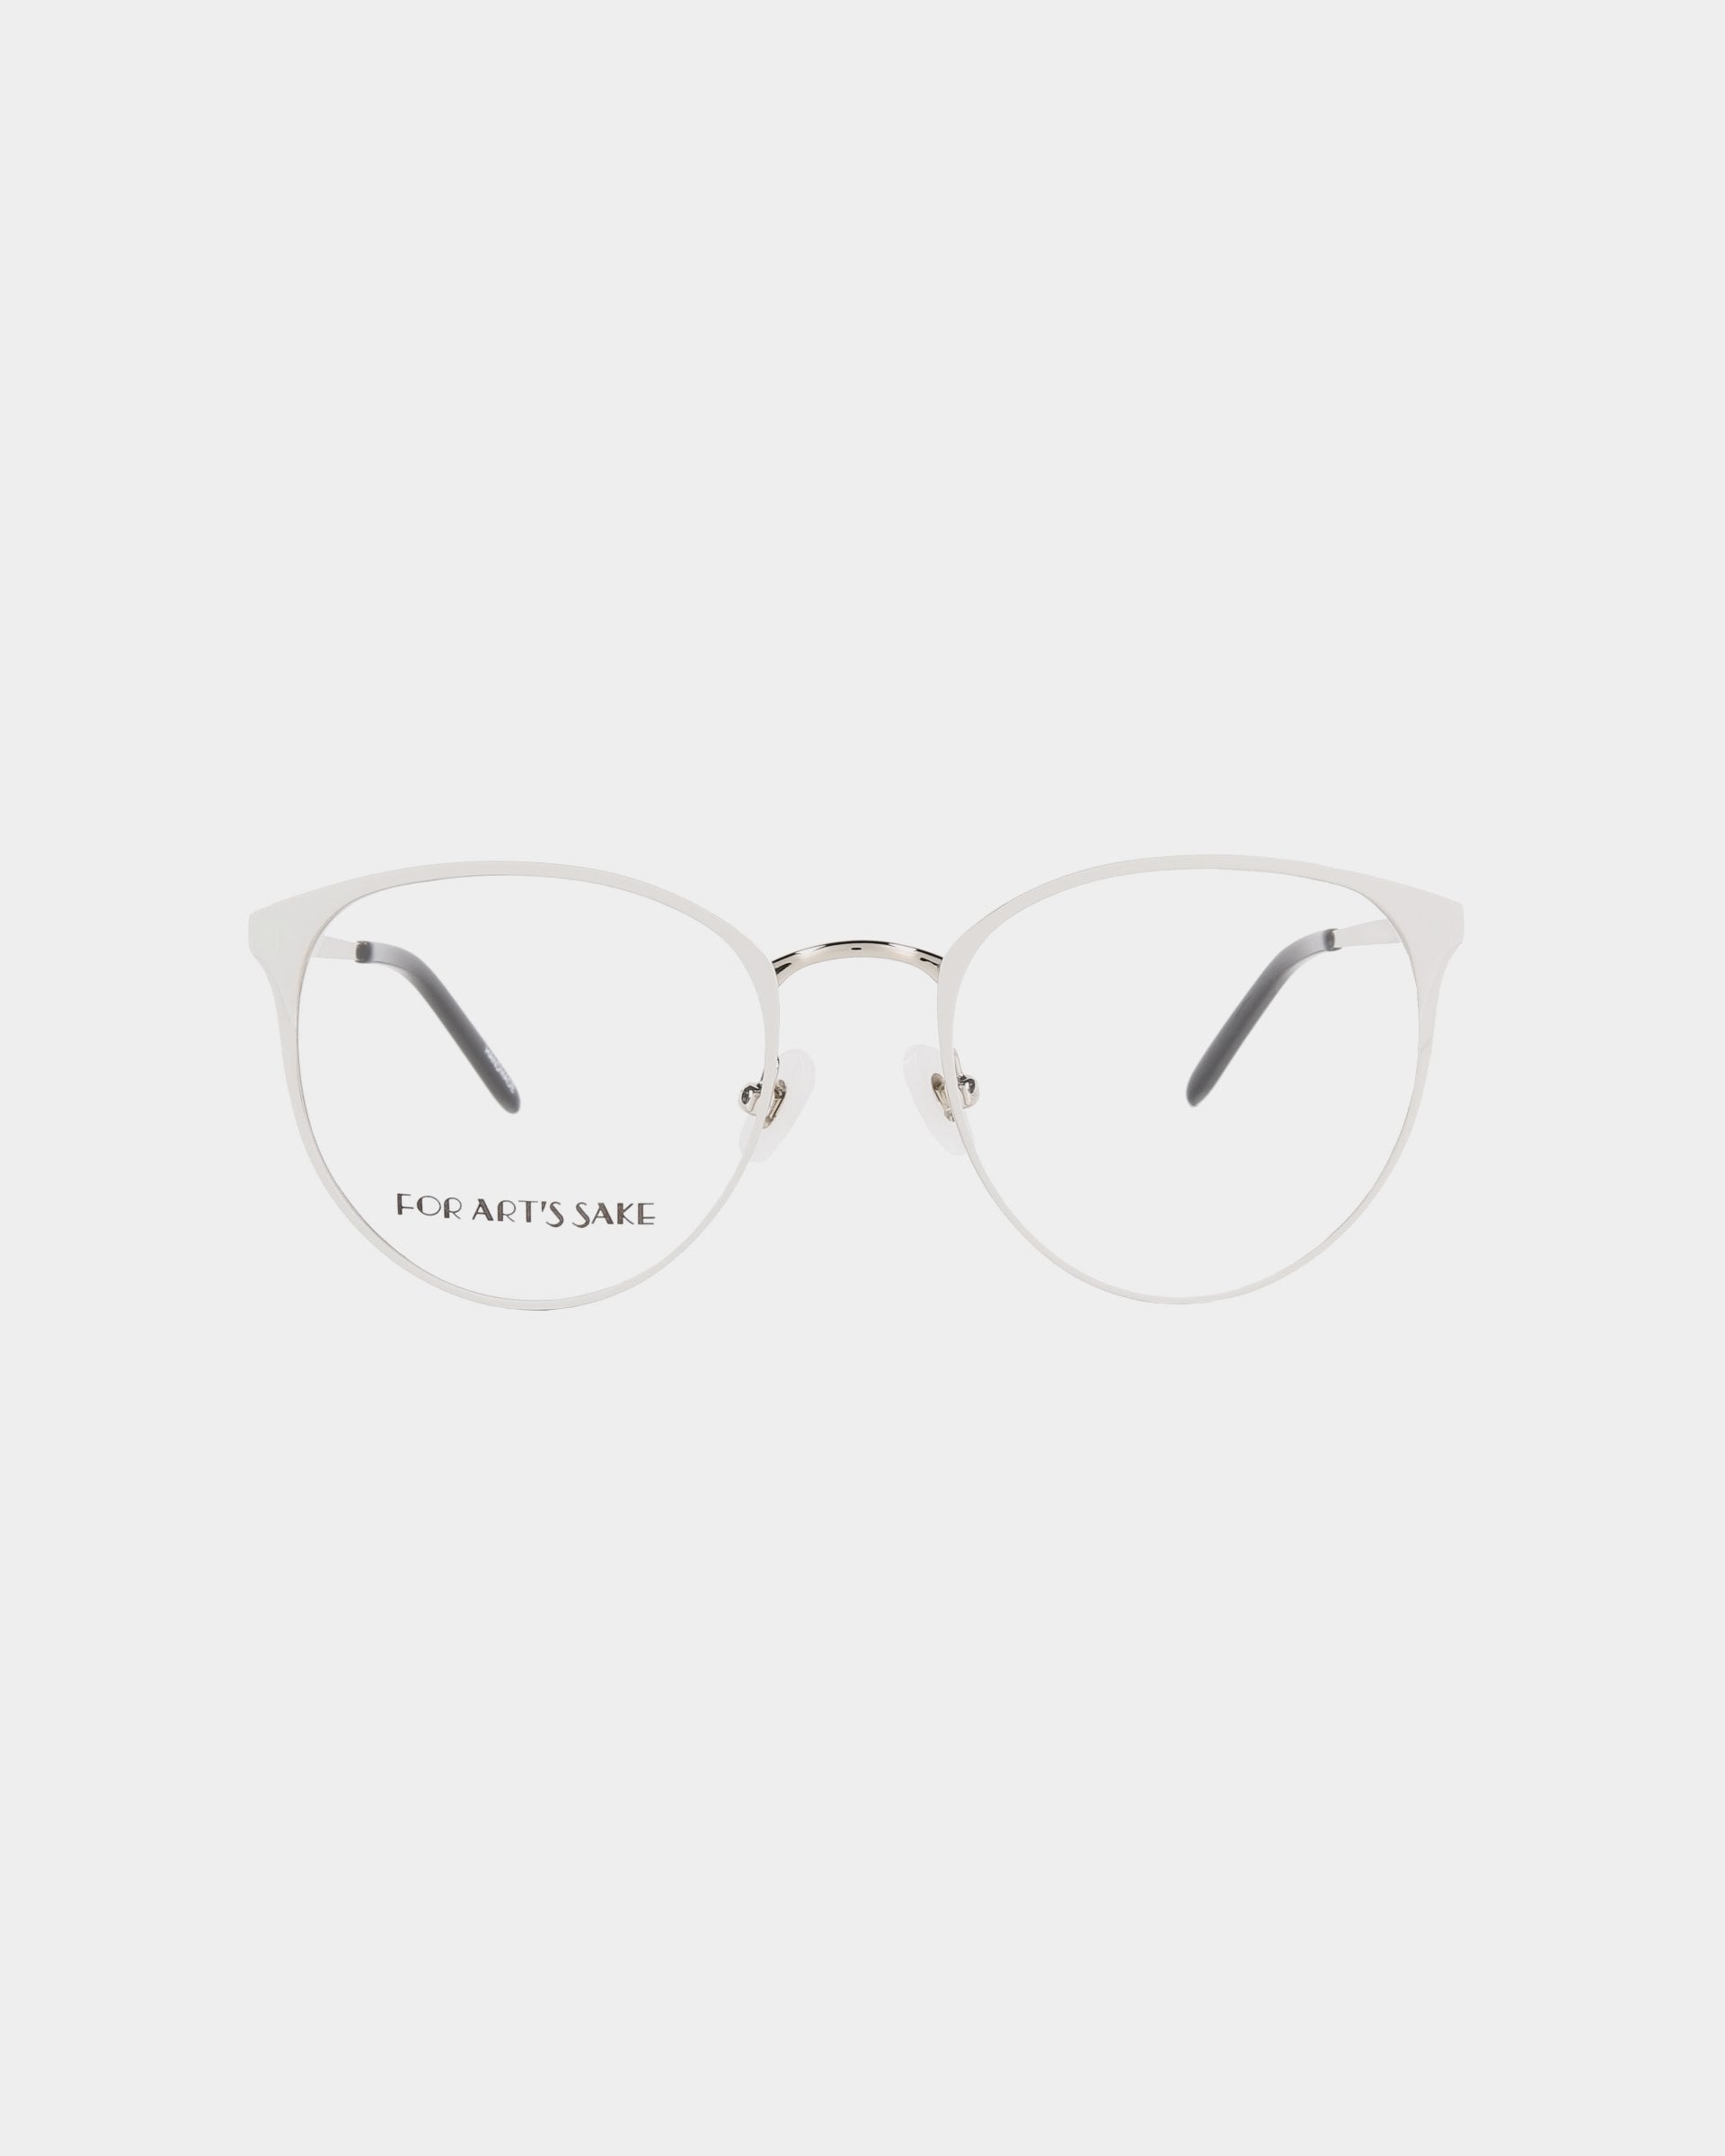 A pair of **For Art&#39;s Sake® Olivia Grey** minimalist eyeglasses with round, silver metal frames. The glasses have clear lenses and sleek temples with grey tips. Featuring blue light filter technology, the words &quot;FOR ART&#39;S SAKE&quot; are printed on the left lens. The background is plain white.